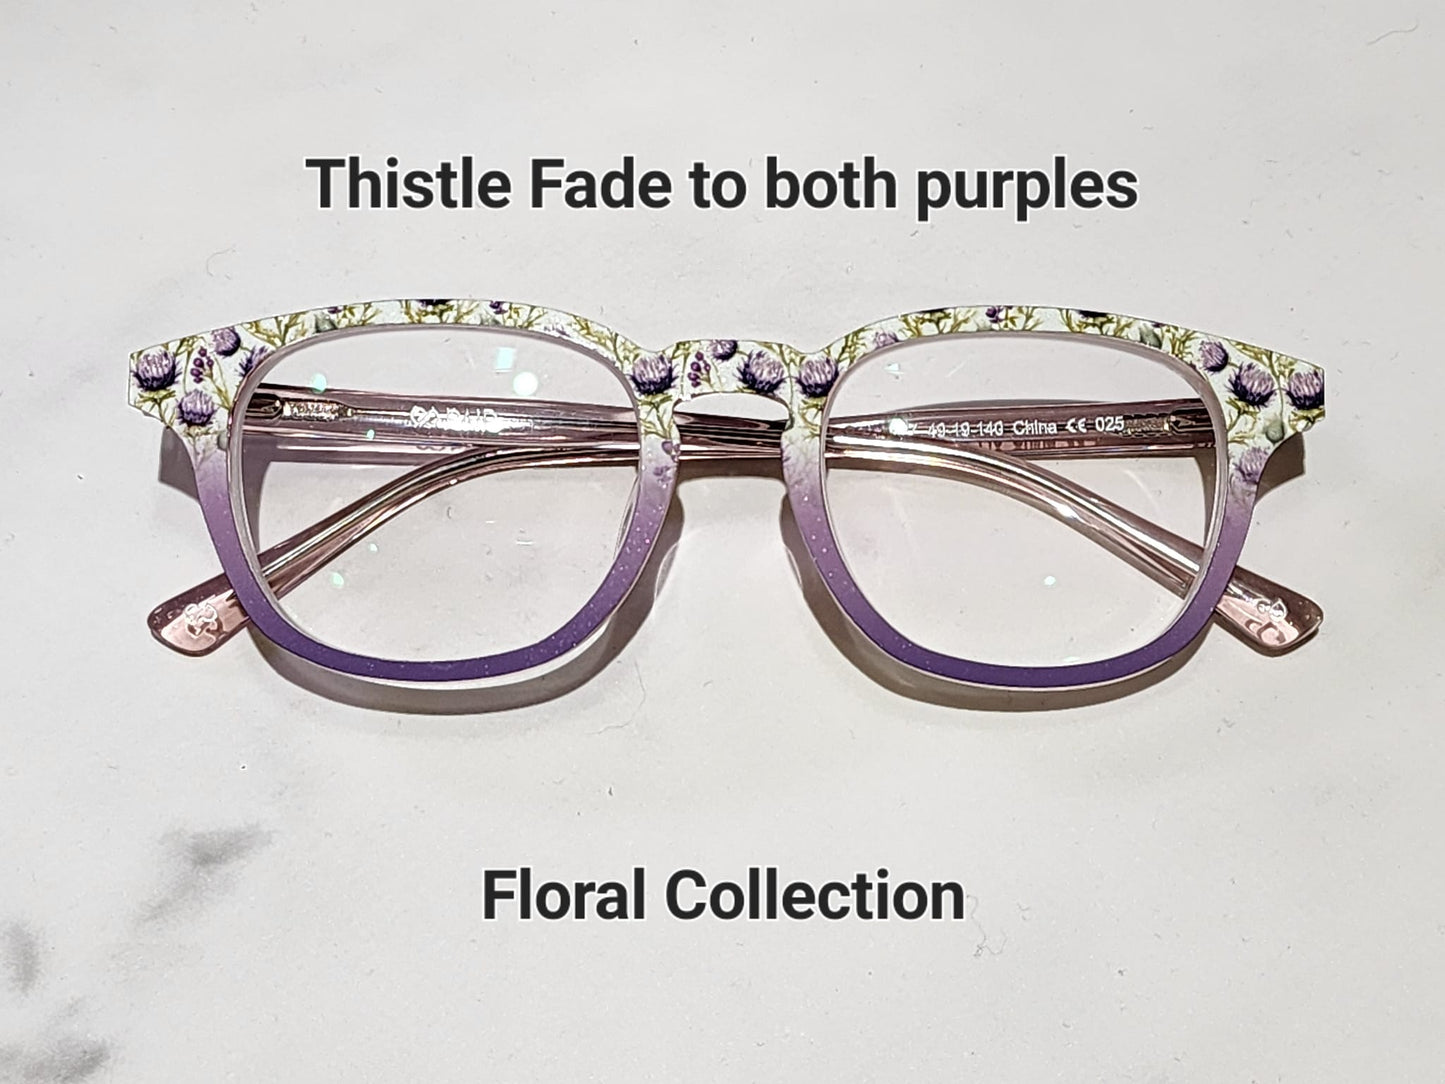 Thistle Fade to both purples Eyewear Frame Toppers COMES WITH MAGNETS